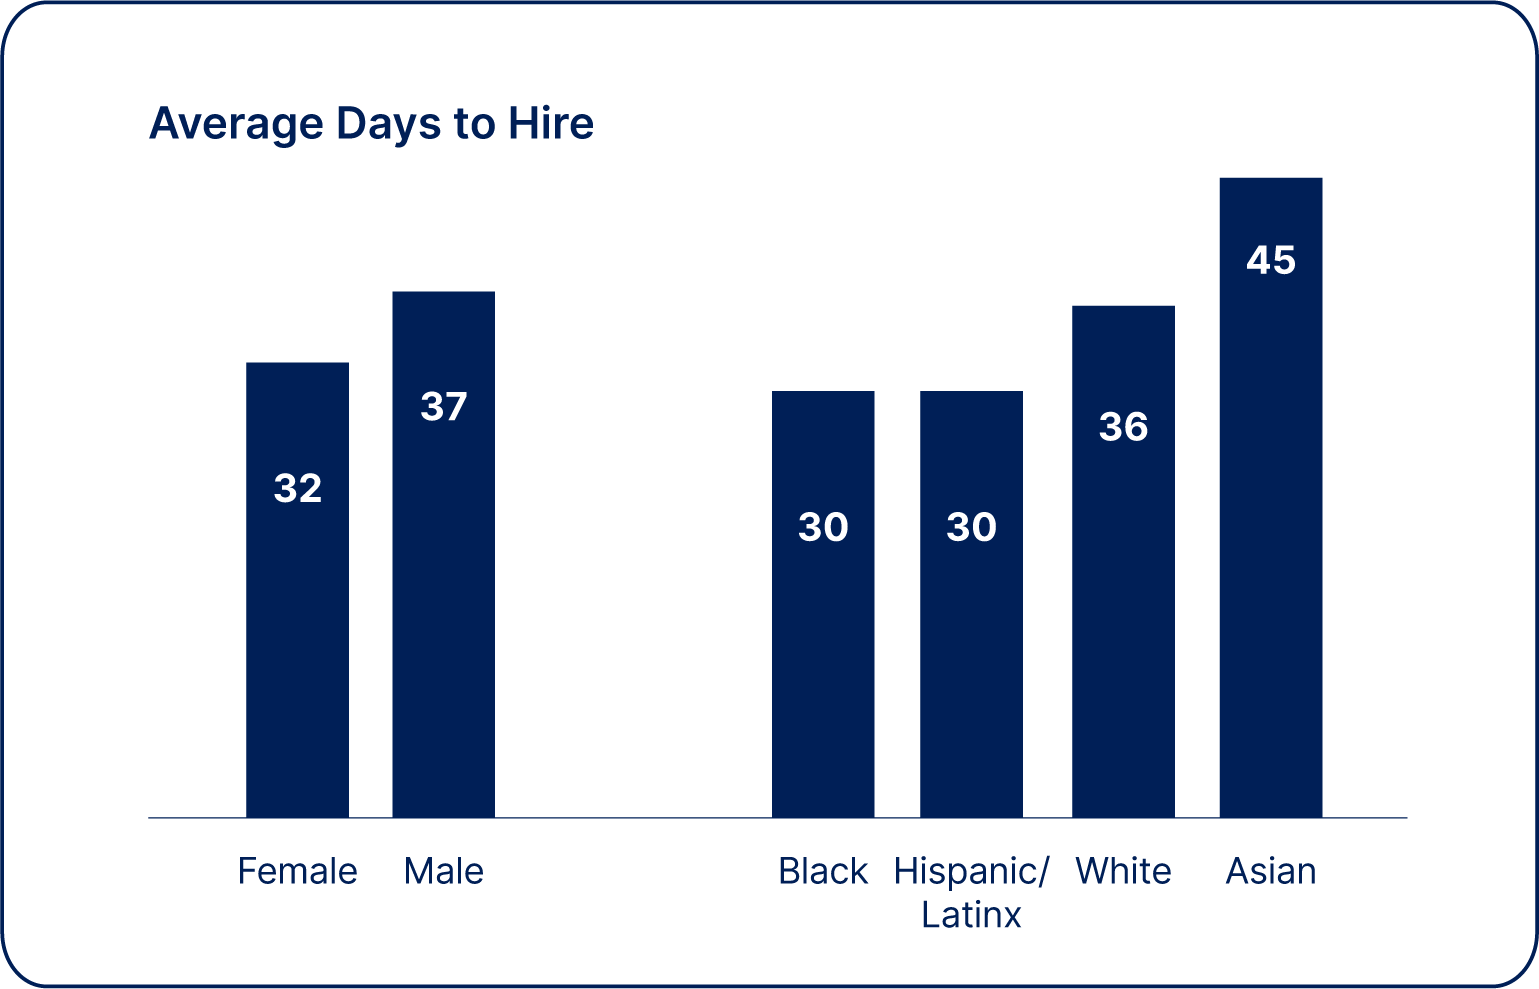 Average days to hire